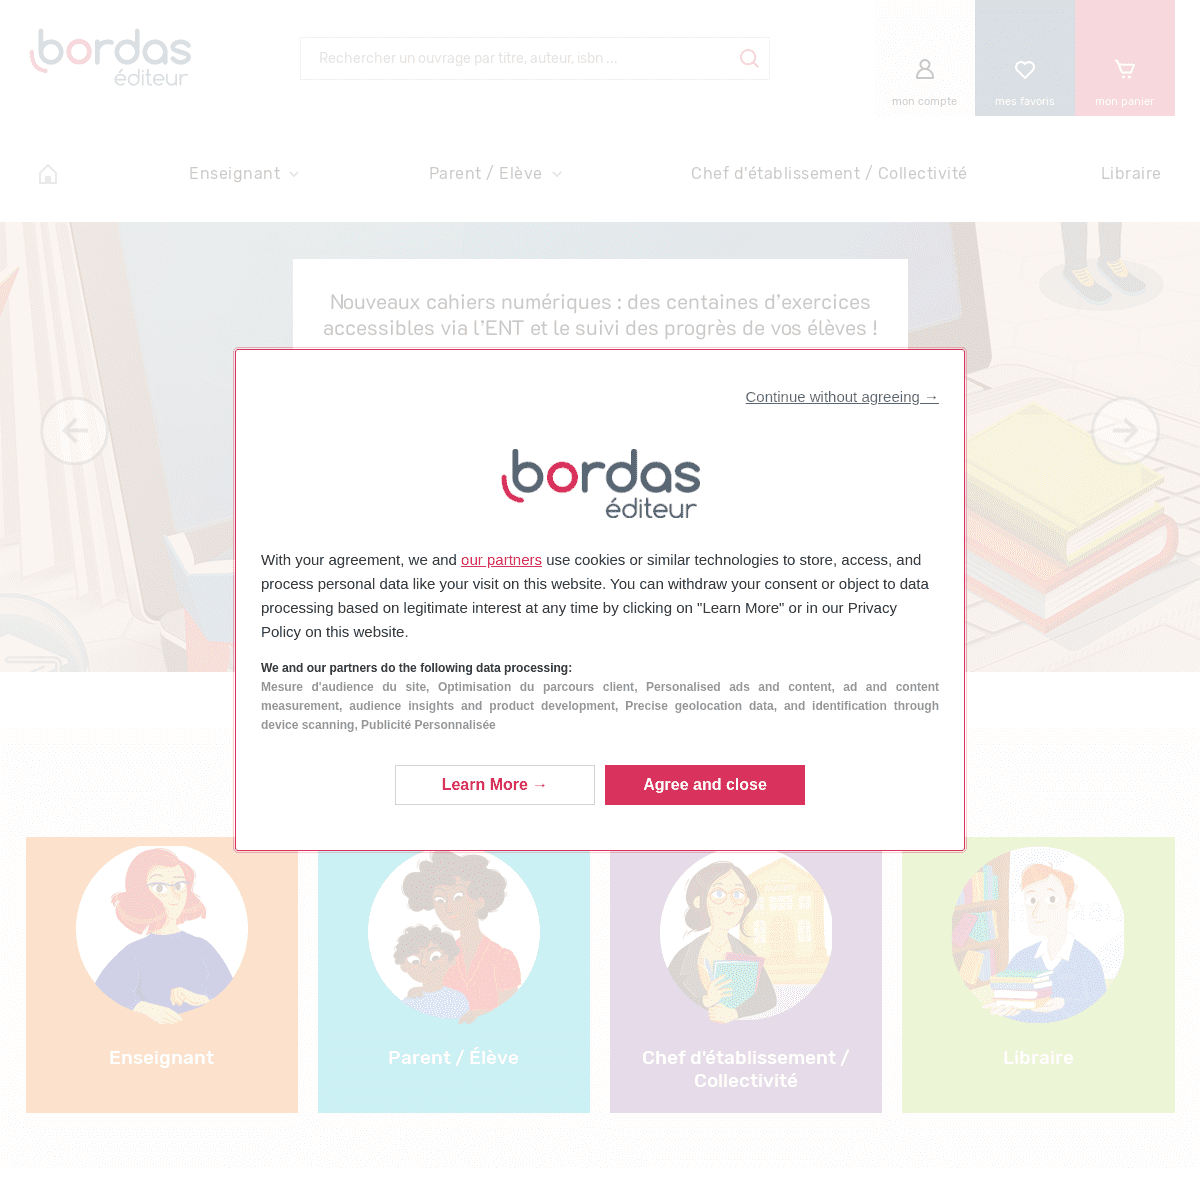 A complete backup of https://editions-bordas.fr